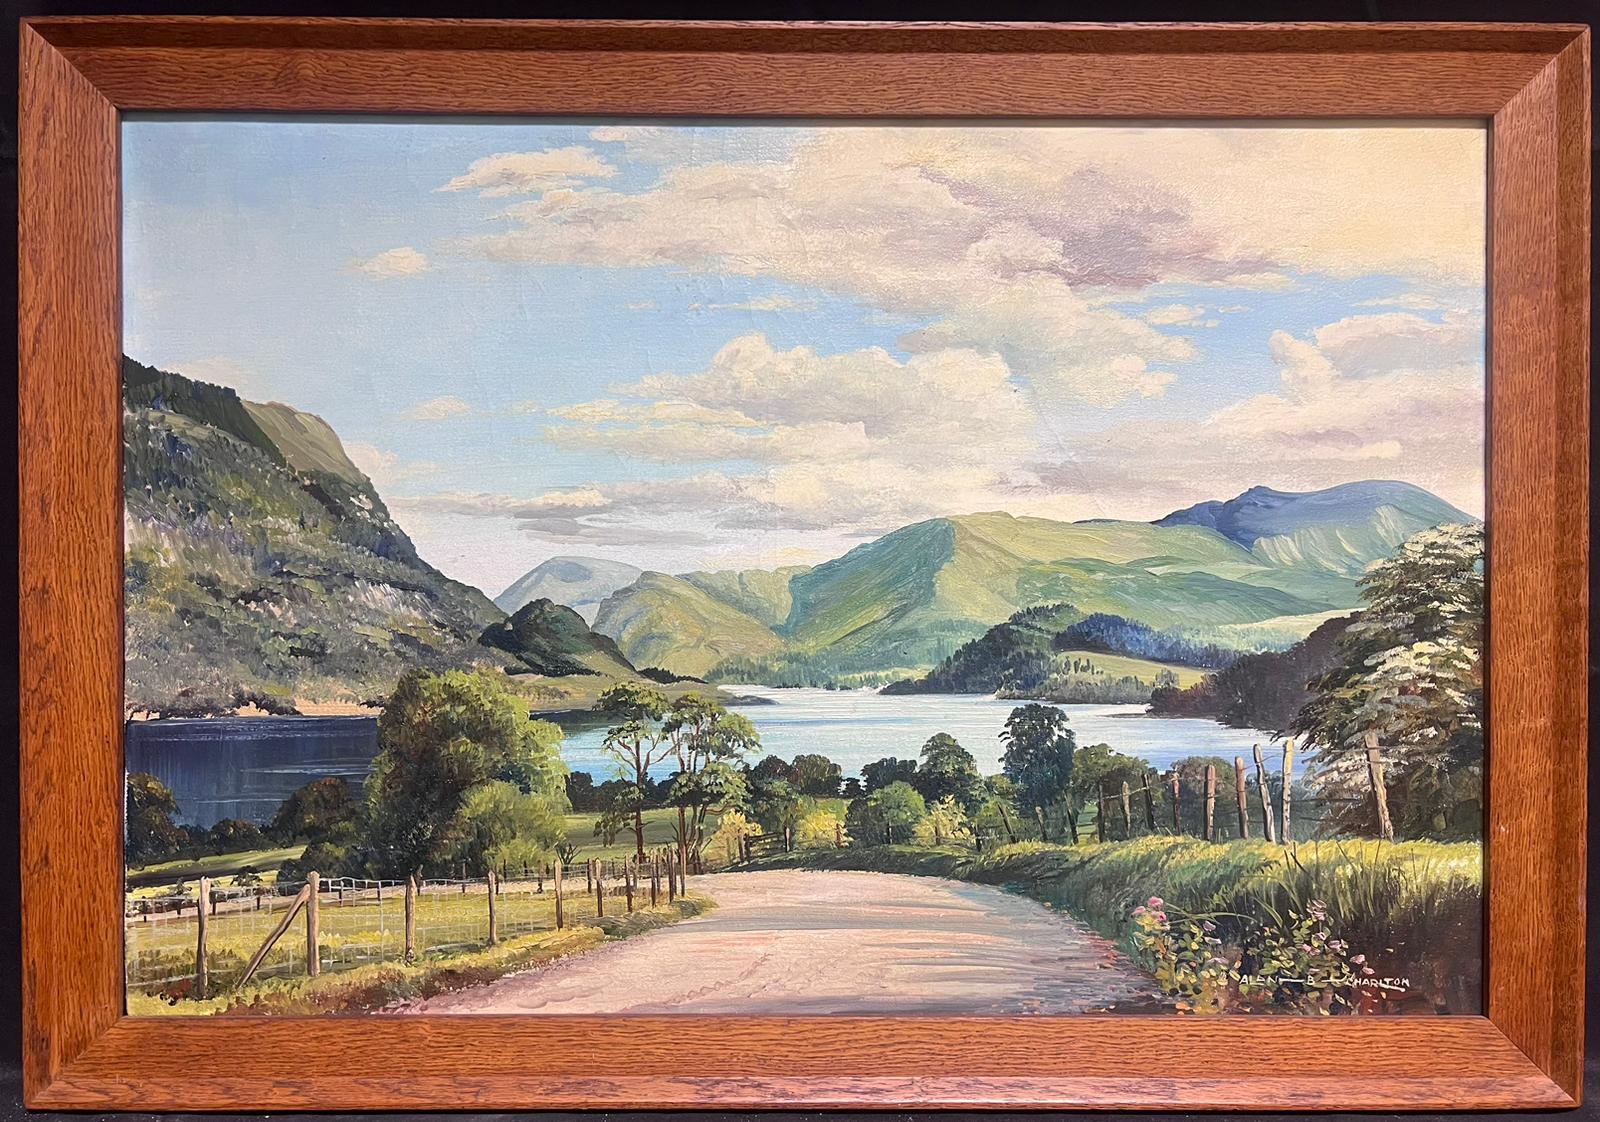 Alan . B Charlton Landscape Painting - Ullswater The English Lake District Large Signed Vintage Oil Painting on Canvas